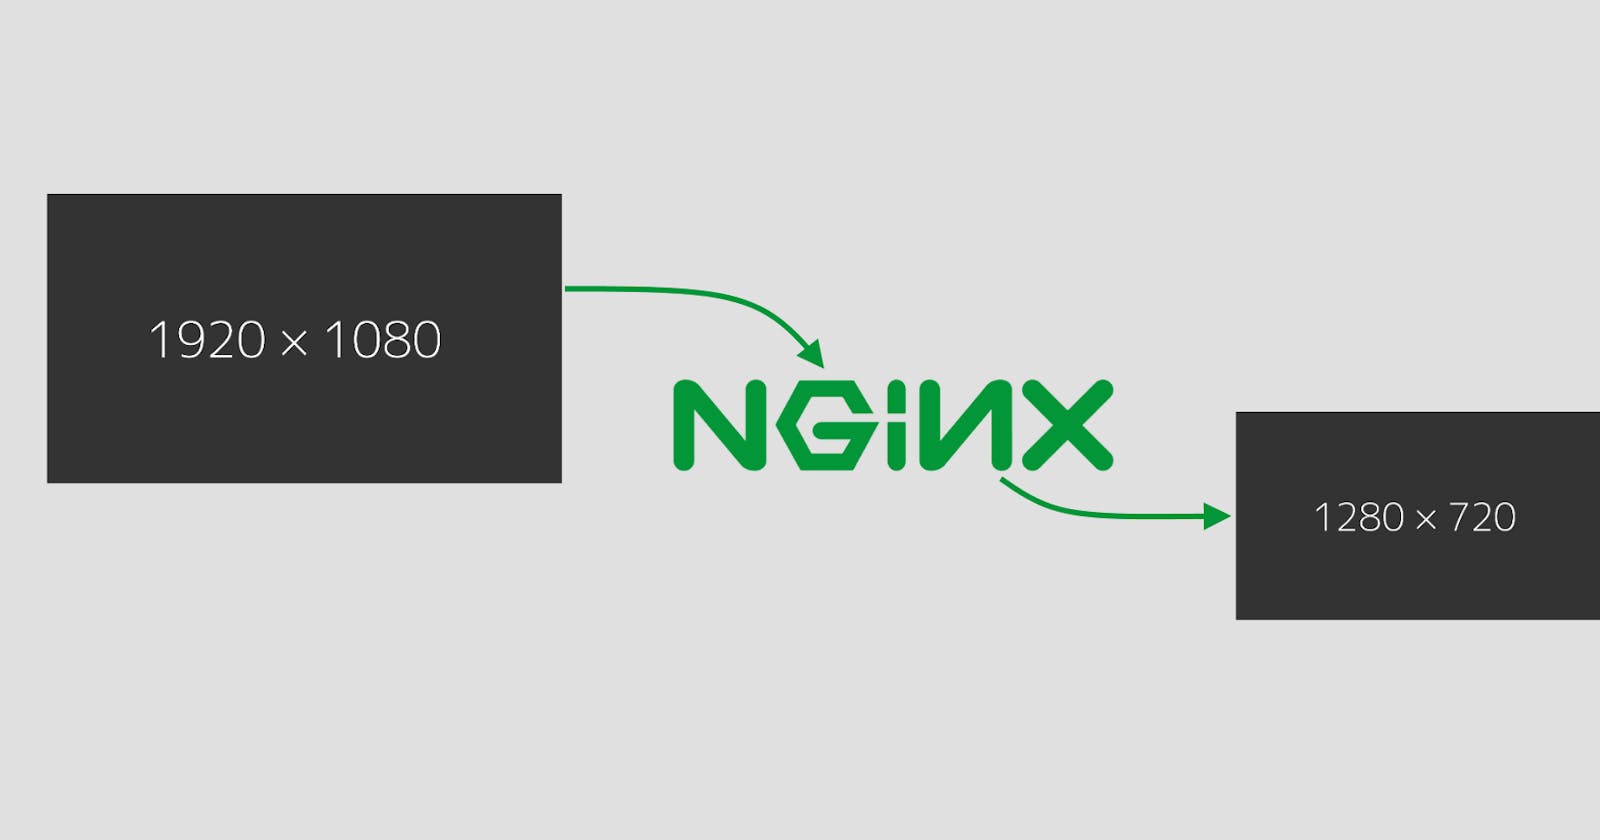 Use nginx to resize your images